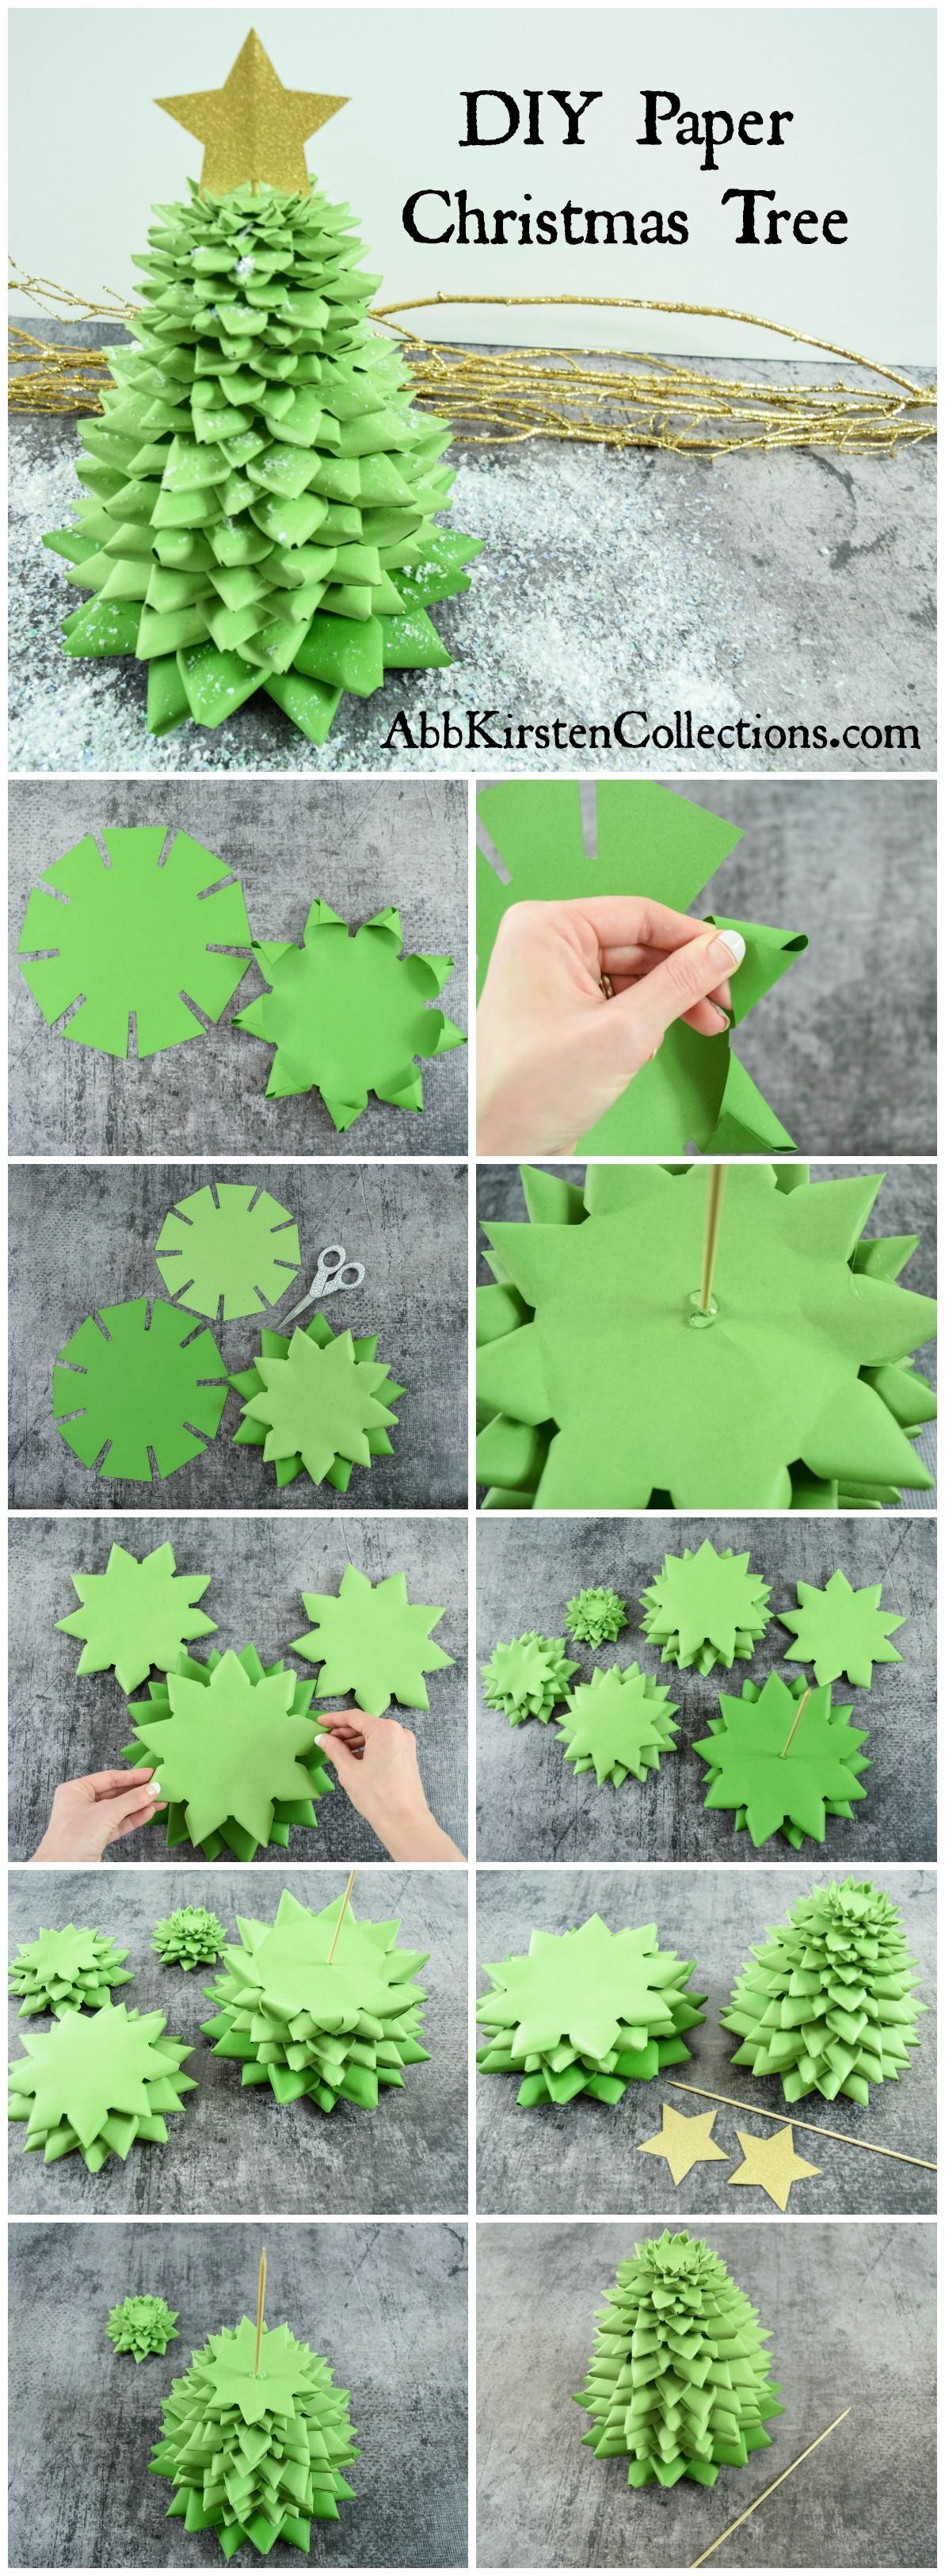 DIY Step by Step Paper Christmas Tree Holiday Craft - DIY Step by Step Paper Christmas Tree Holiday Craft -   19 diy Crafts step by step ideas